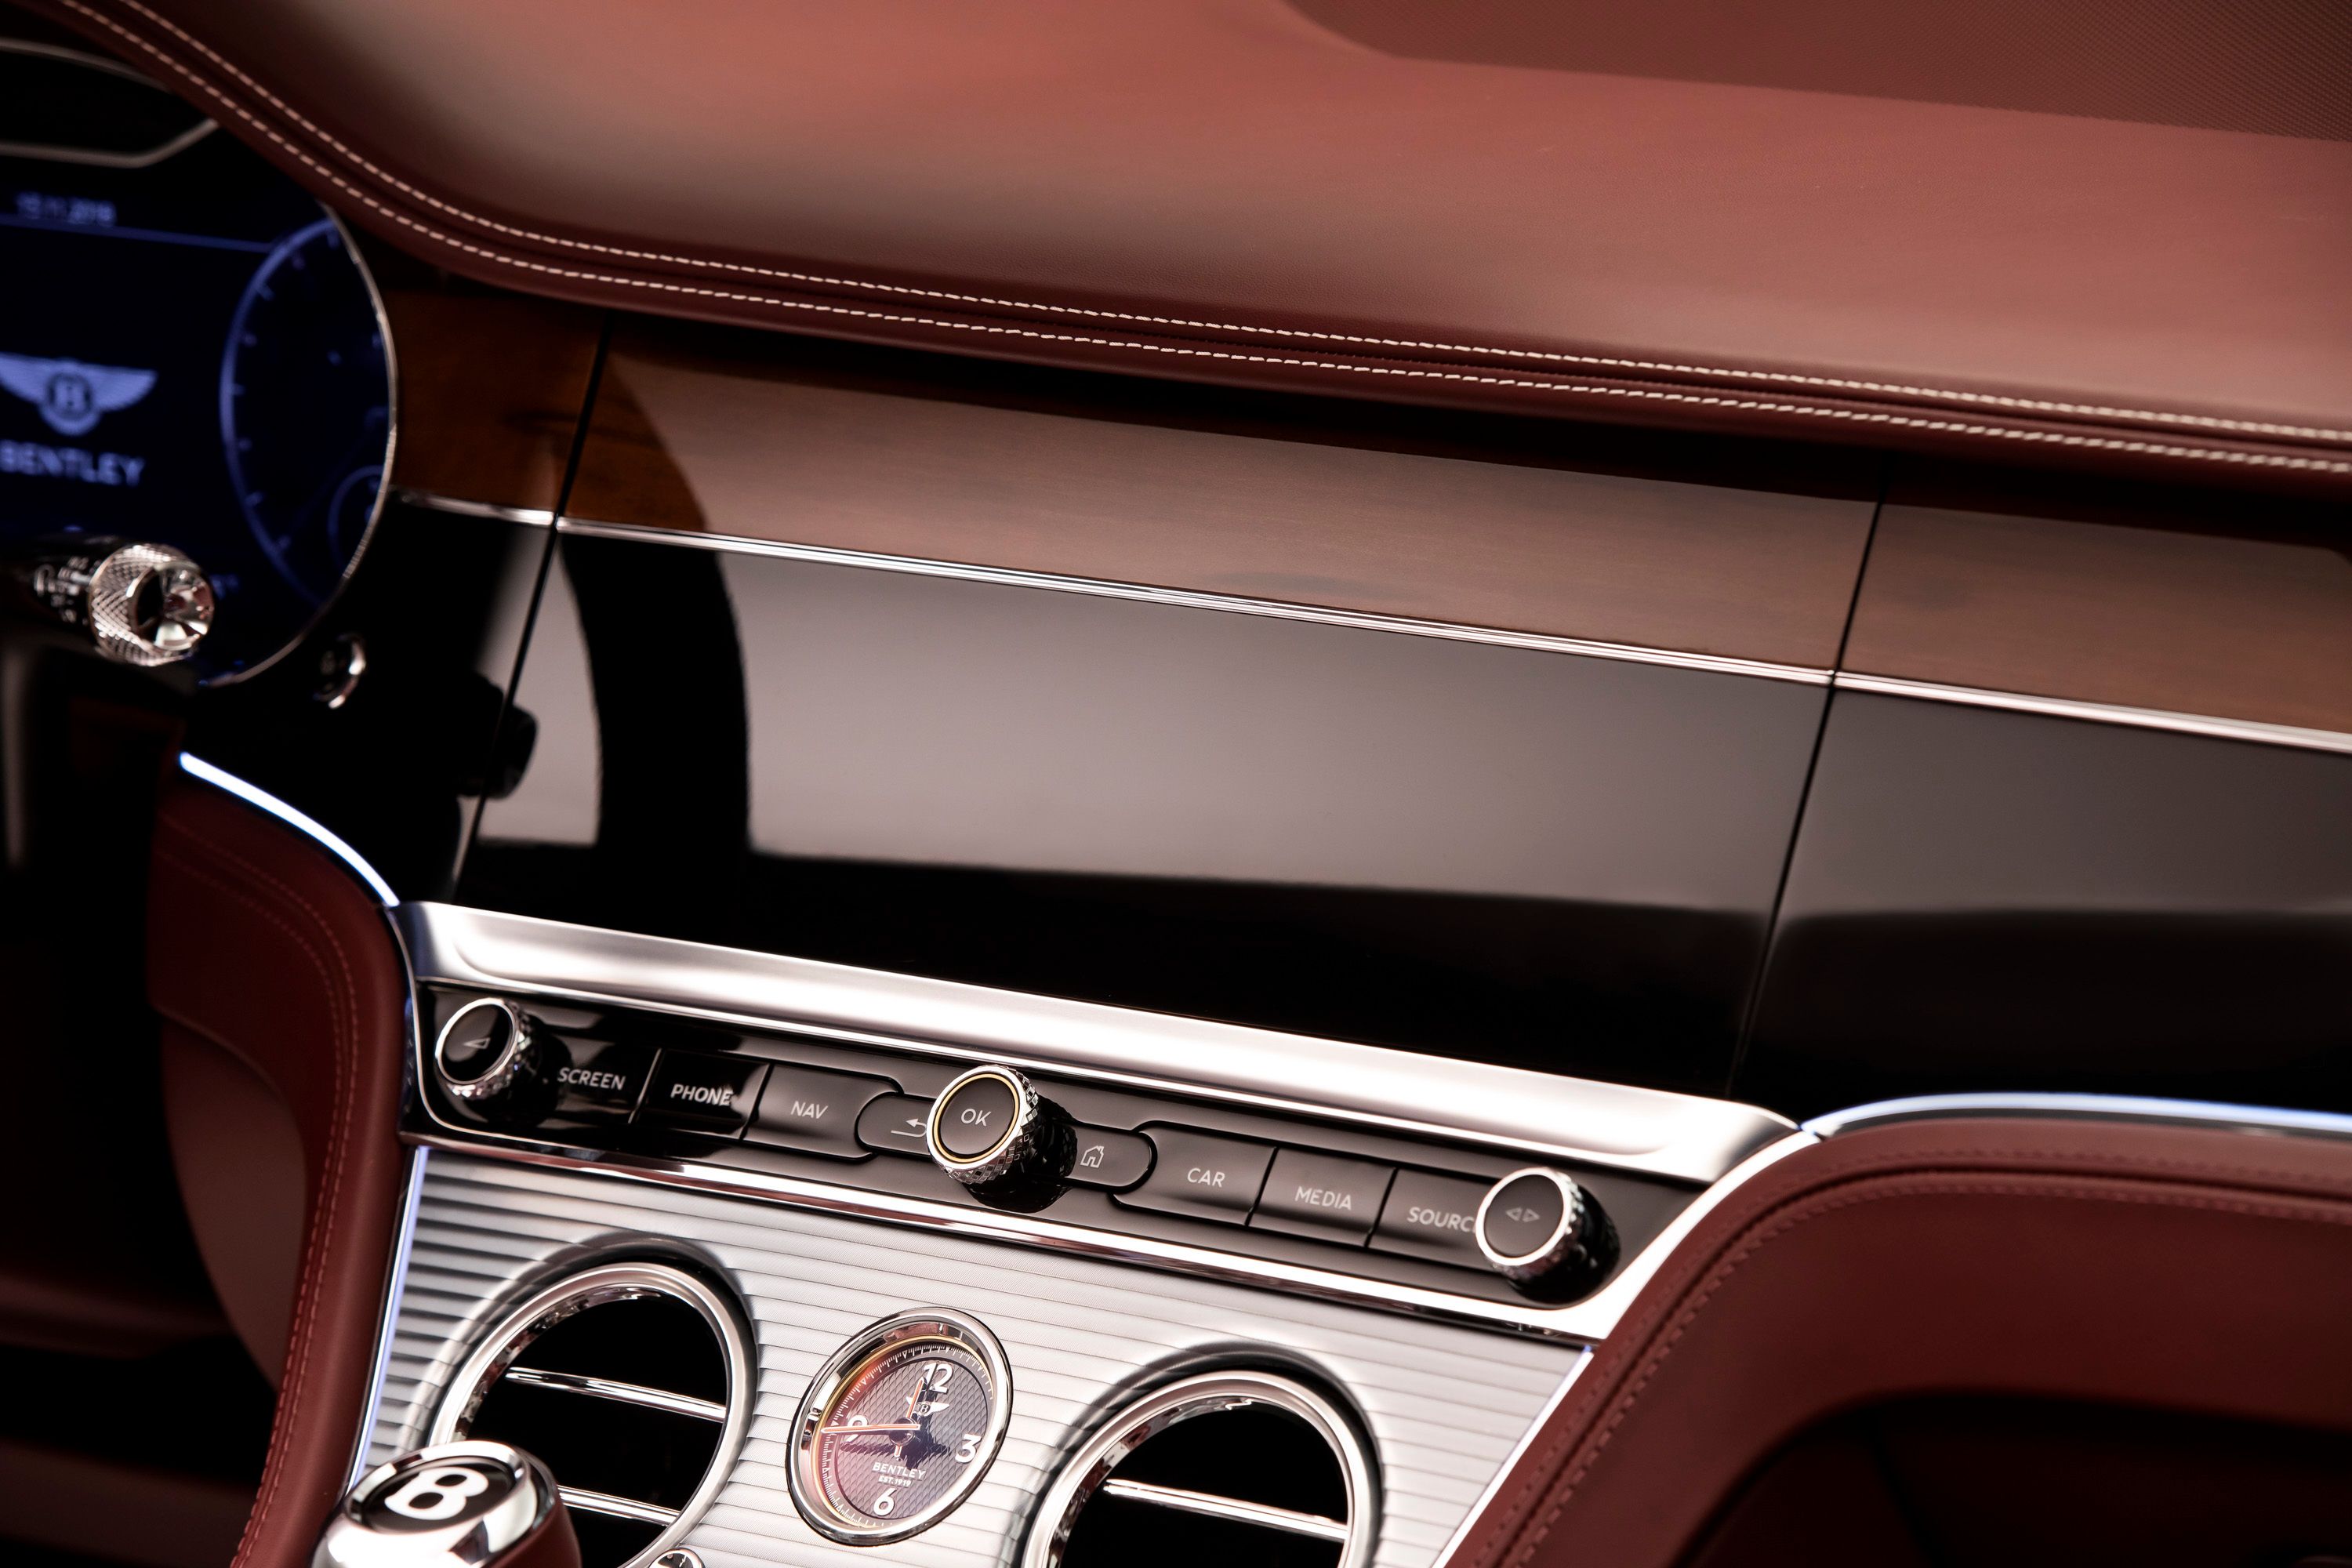 We Can't Get Enough of the Rotating Display in the Bentley Continental GT Convertible